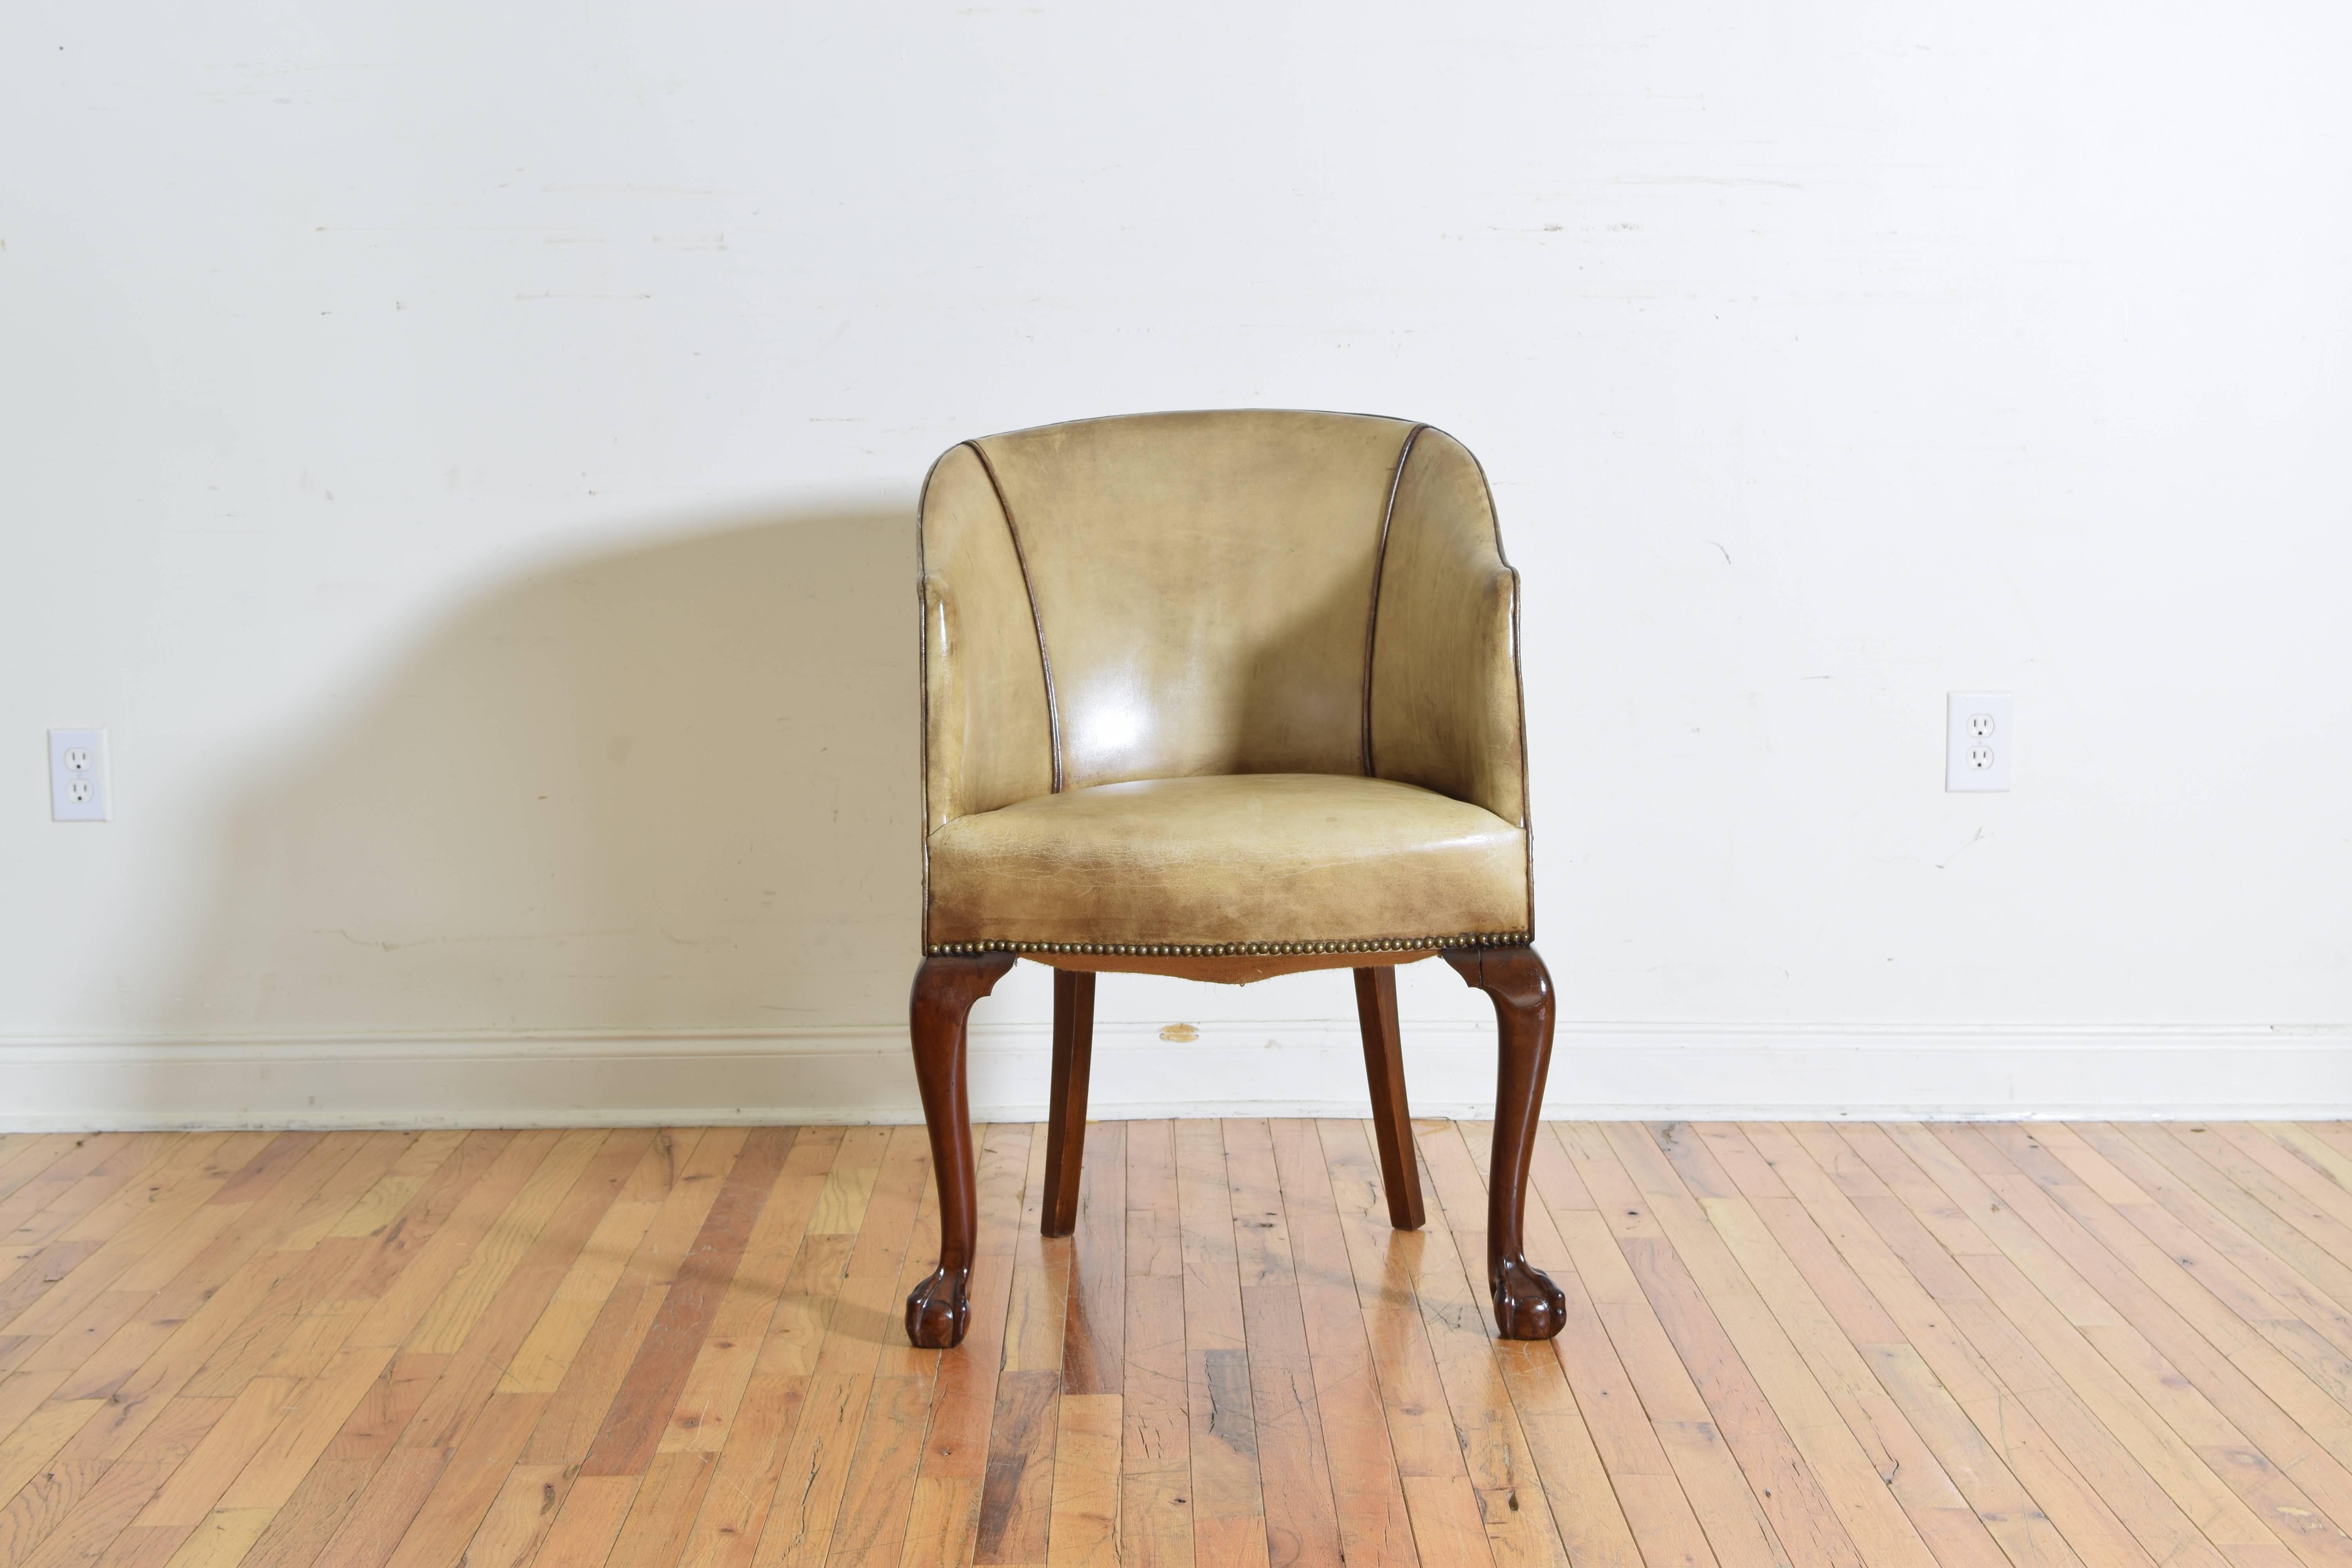 Having an enclosed leather upholstered back divided into panels by patinated brass nailheads, the front cabriole style legs ending in carved ball and claw feet, the rear legs are splayed.